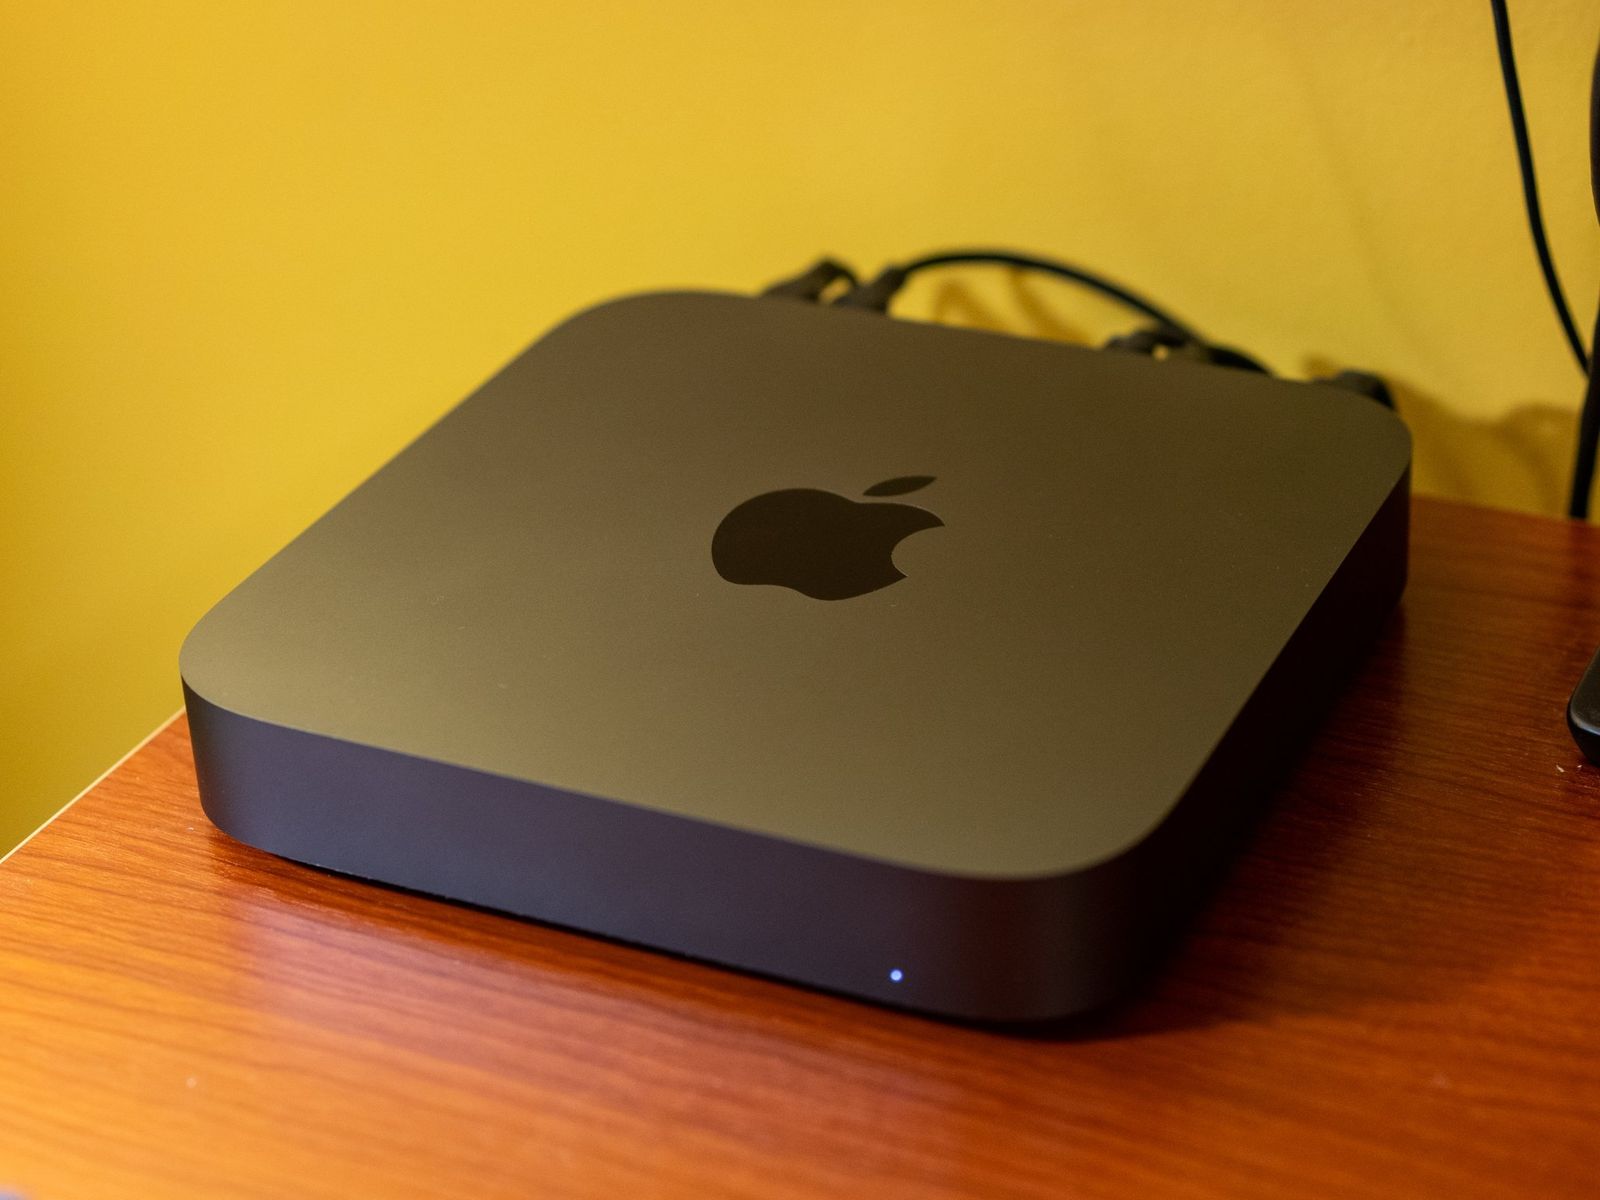 Should you get AppleCare+ for your Mac mini?